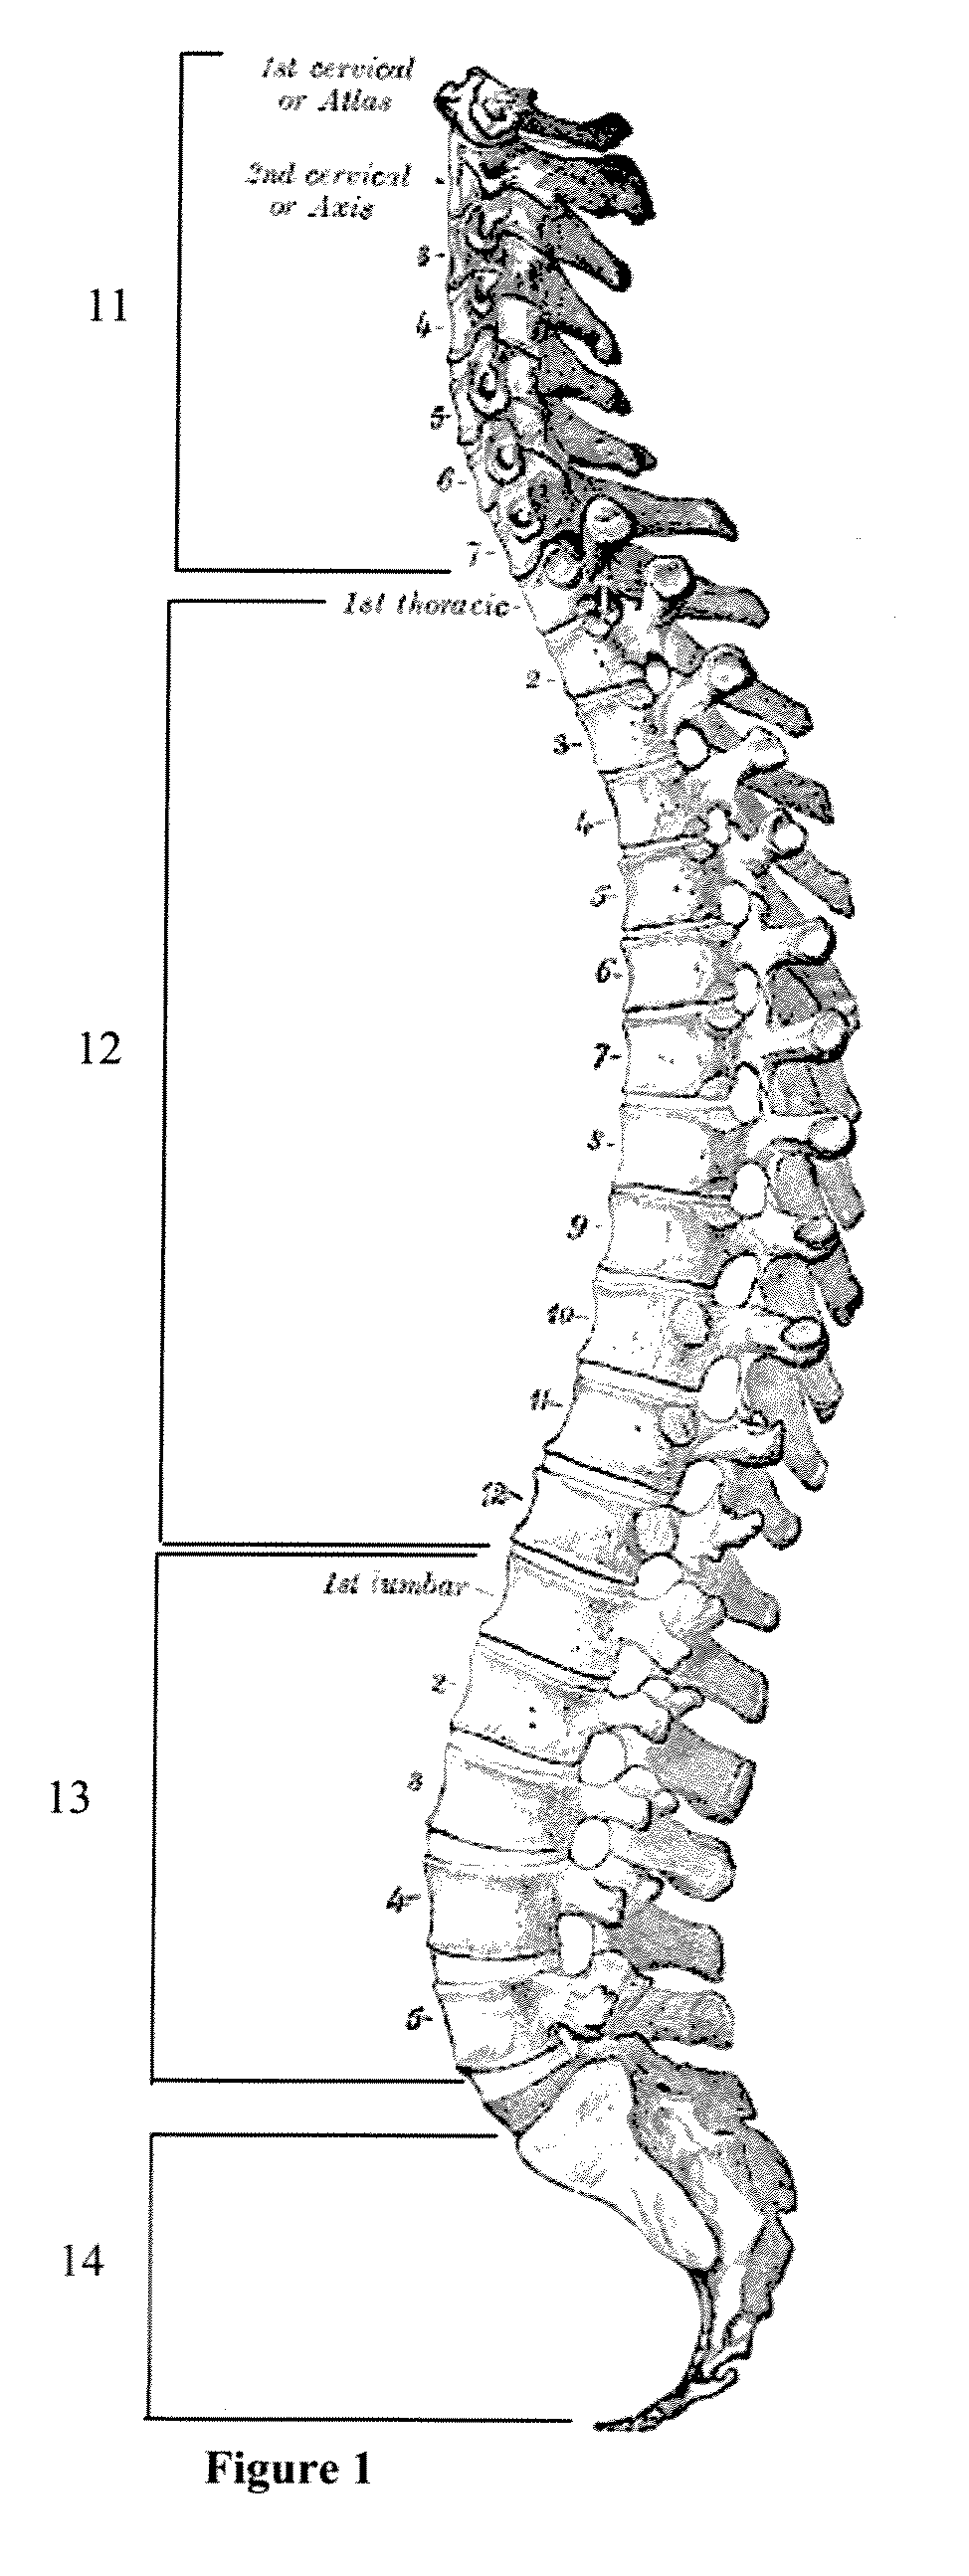 System and Method for Spinal Cord and Vertebrae Segmentation